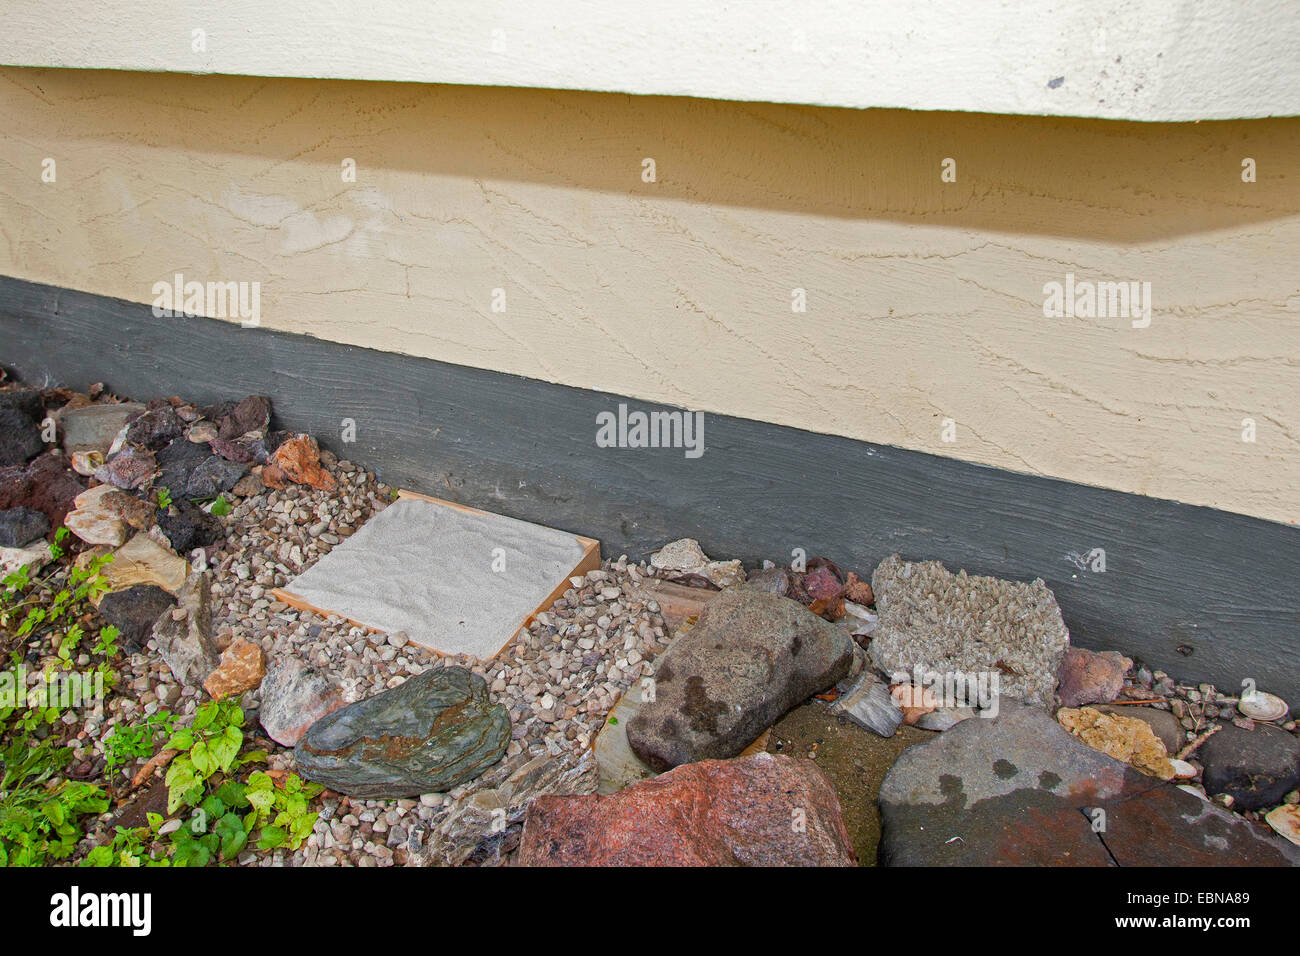 sandpit  for the settlement of antlions under a rain-protected house projection, Germany Stock Photo